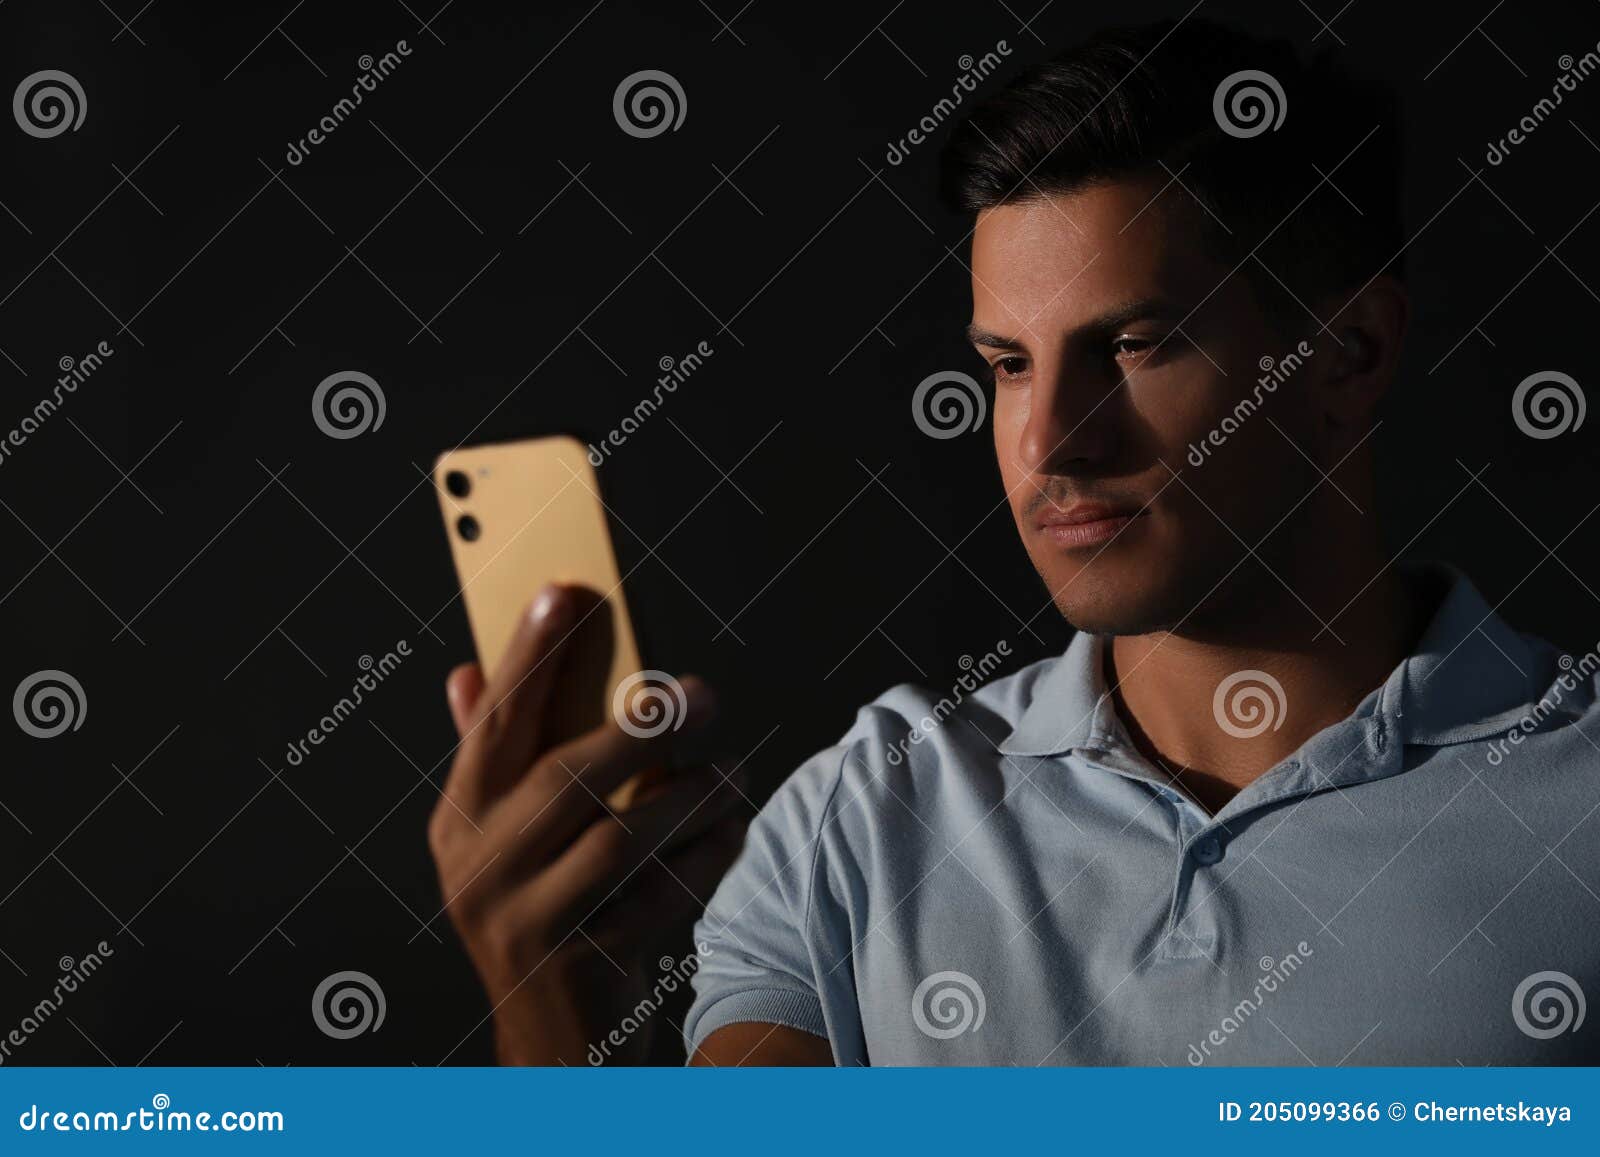 Man Unlocking Smartphone with Facial Scanner on Black Background ...